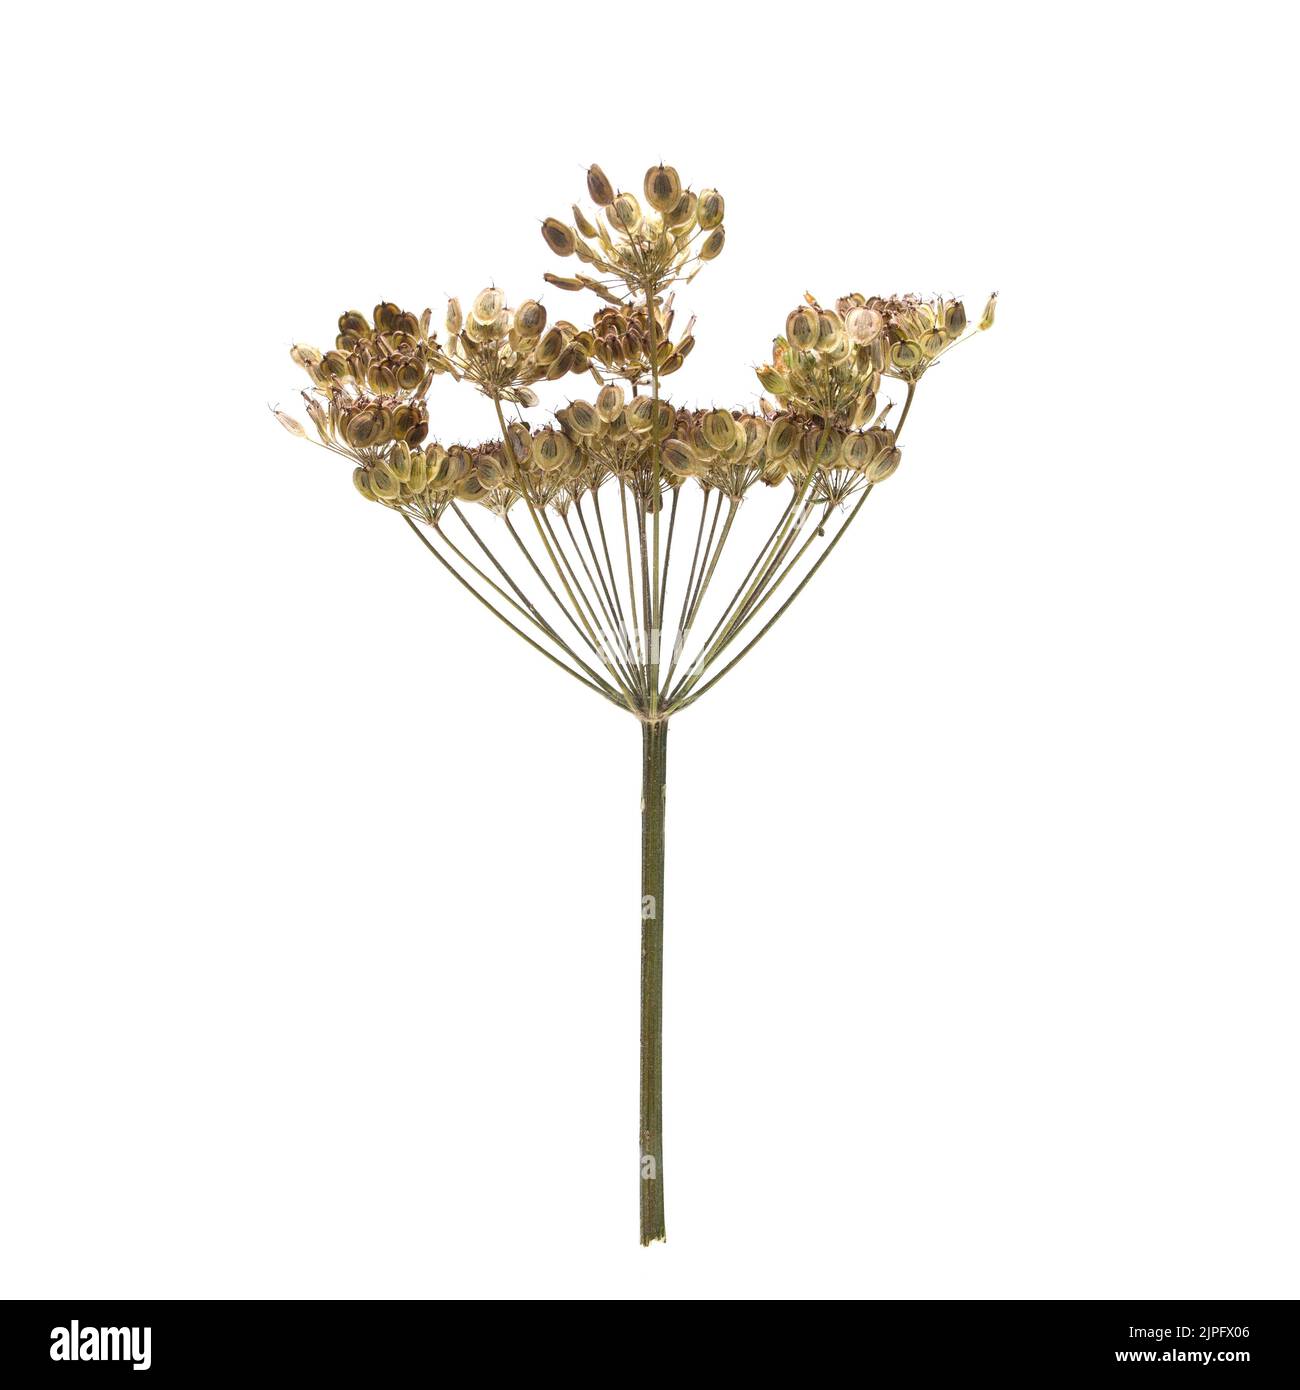 Dry hogweed isolated on a white background Stock Photo